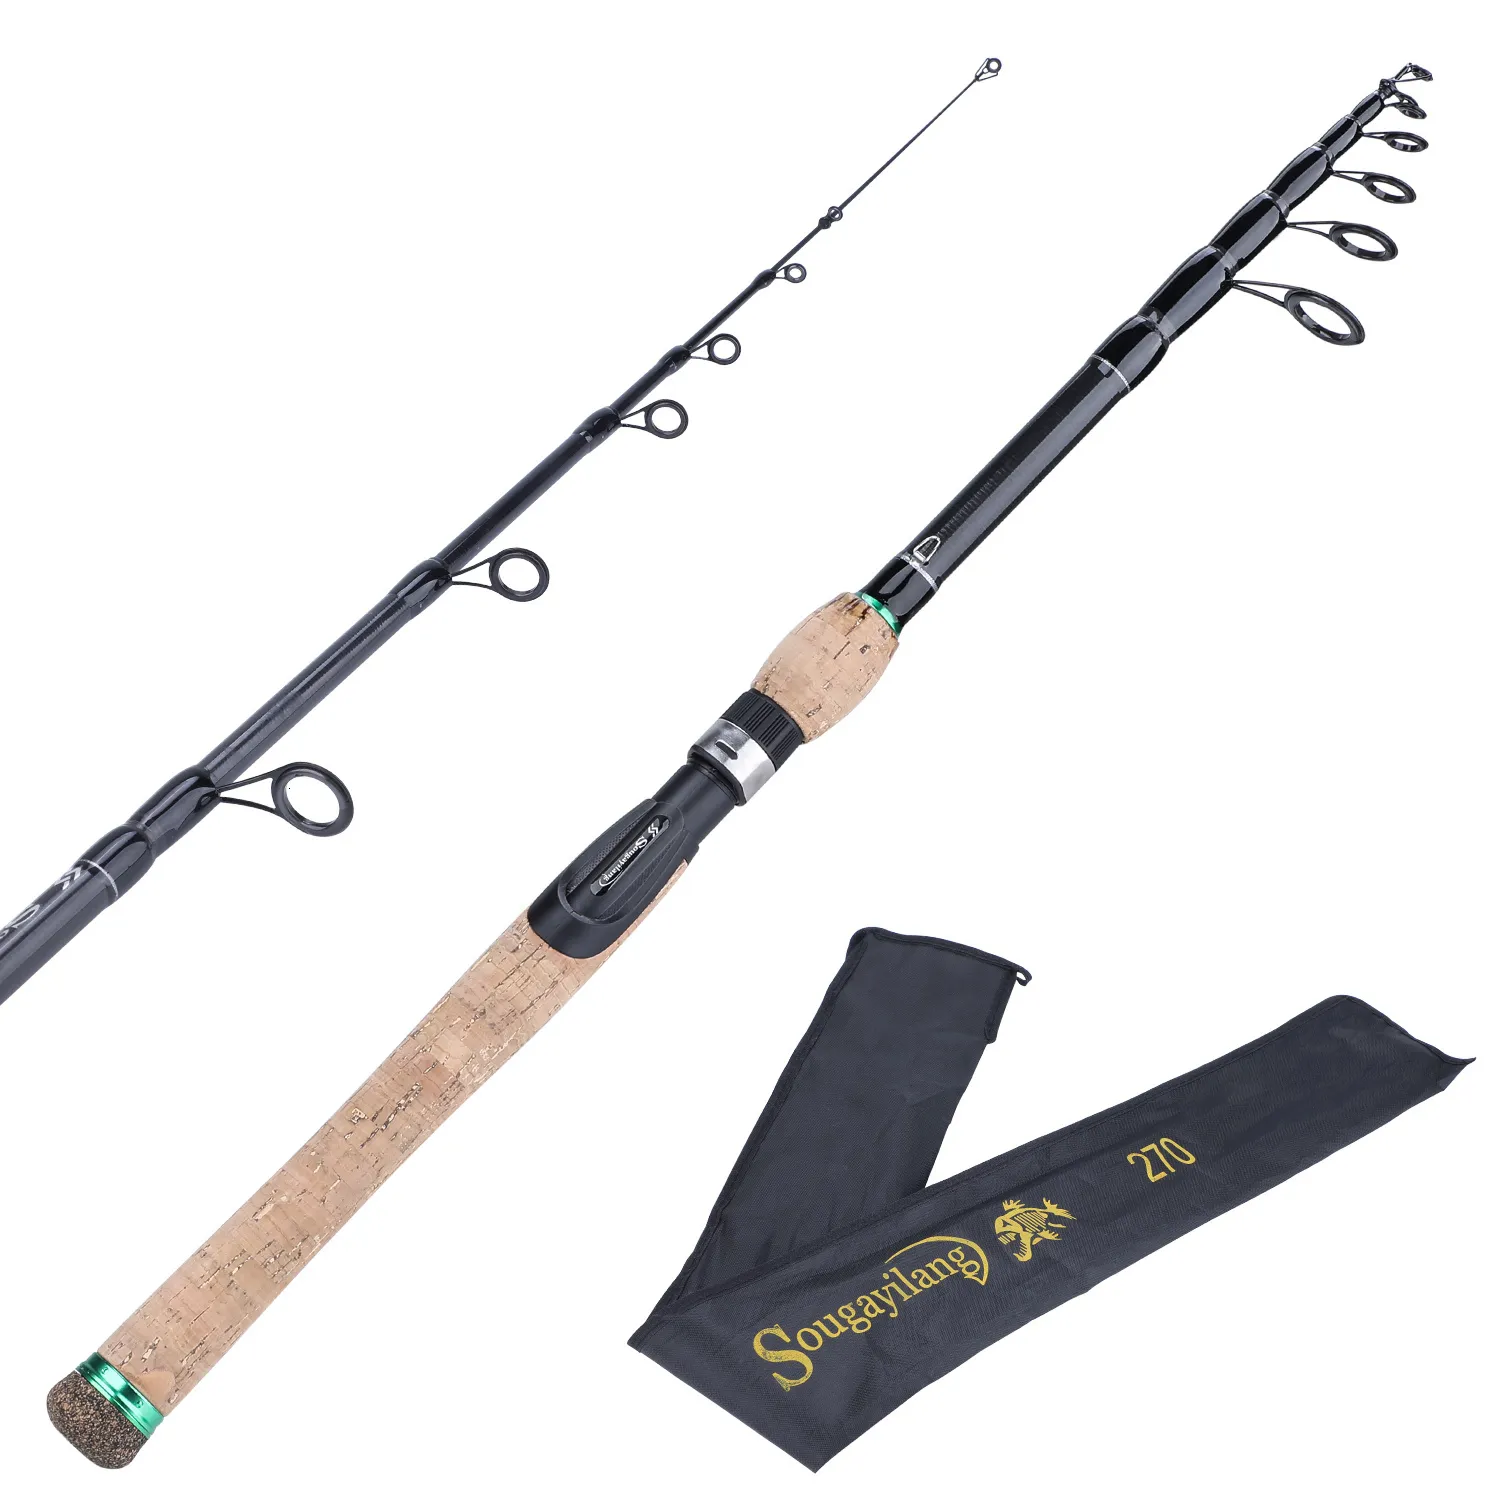 Spinning Rods Sougayilang Telescopic Lure Rod 1.8M 2.1M 2.4M 2.7M Carbon  Fiber Cork Wood Handle Spinning Rod Fishing Pole Tackle 230627 From Lian09,  $8.03